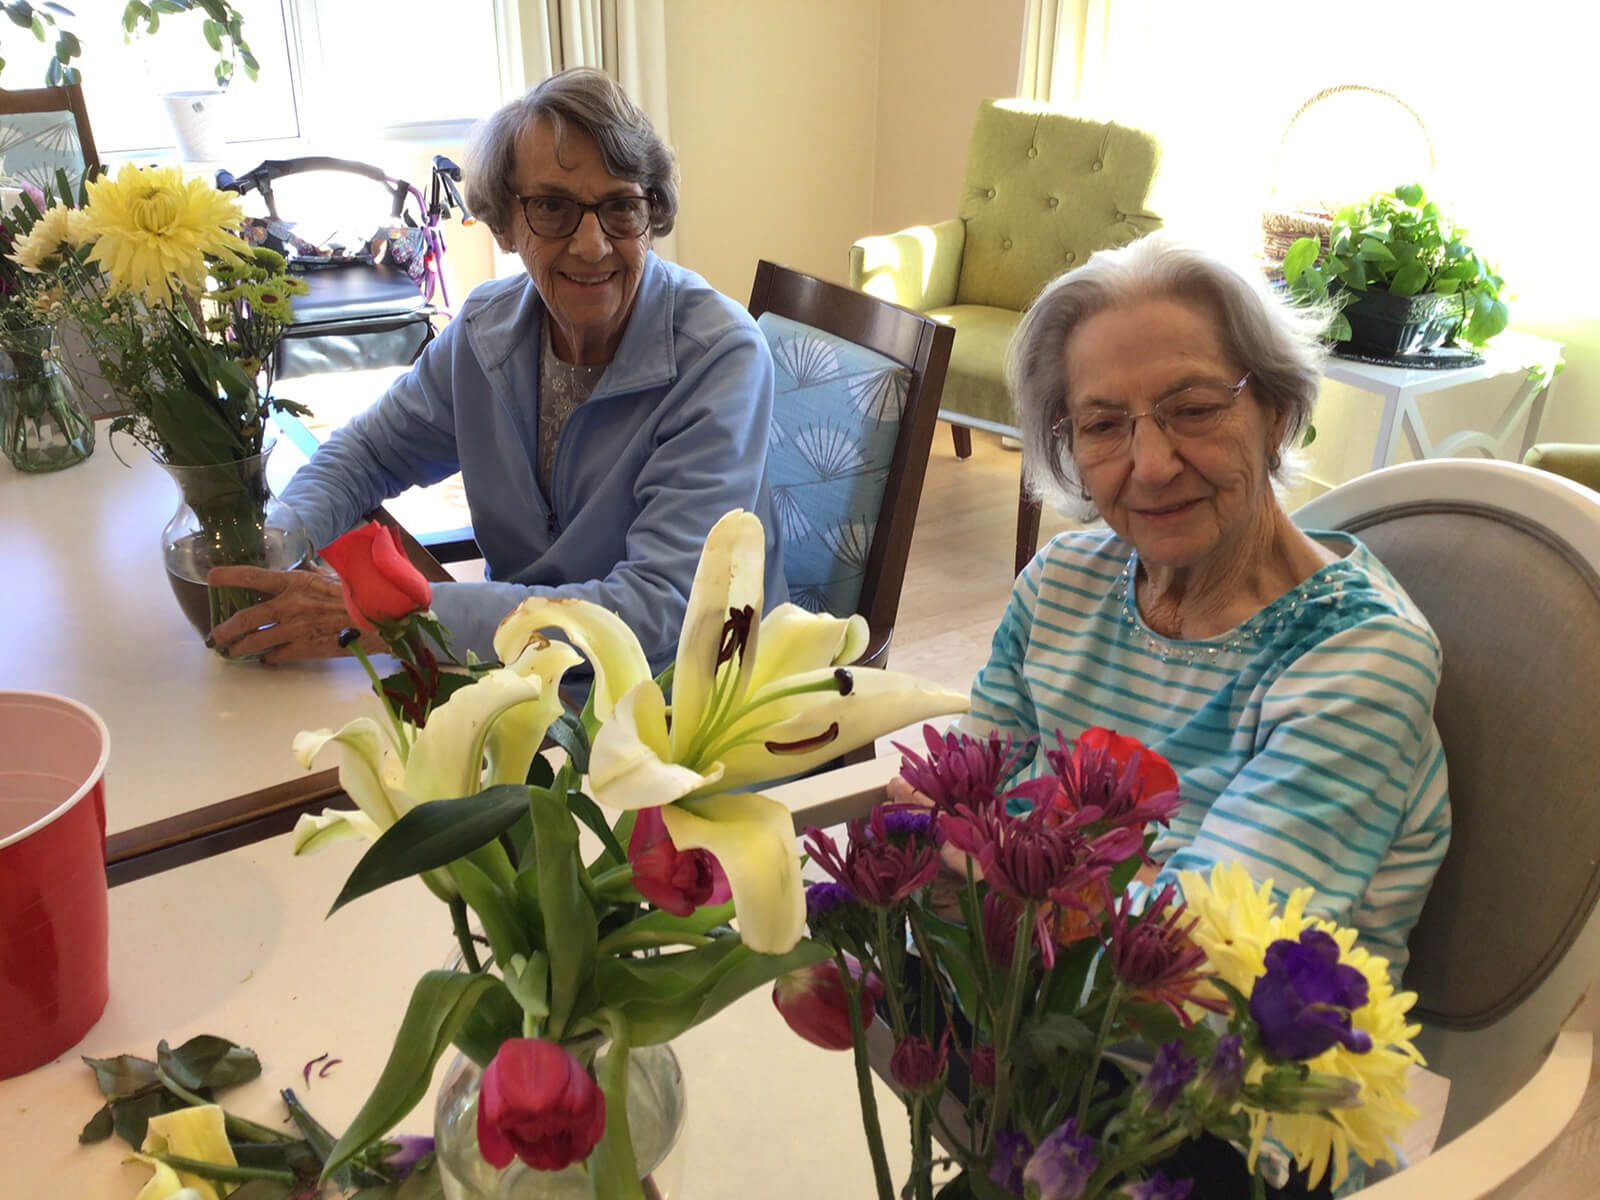 Two senior residents at The Waters on Mayowood smiling as they engage in a flower arrangement activity, enhancing community living.